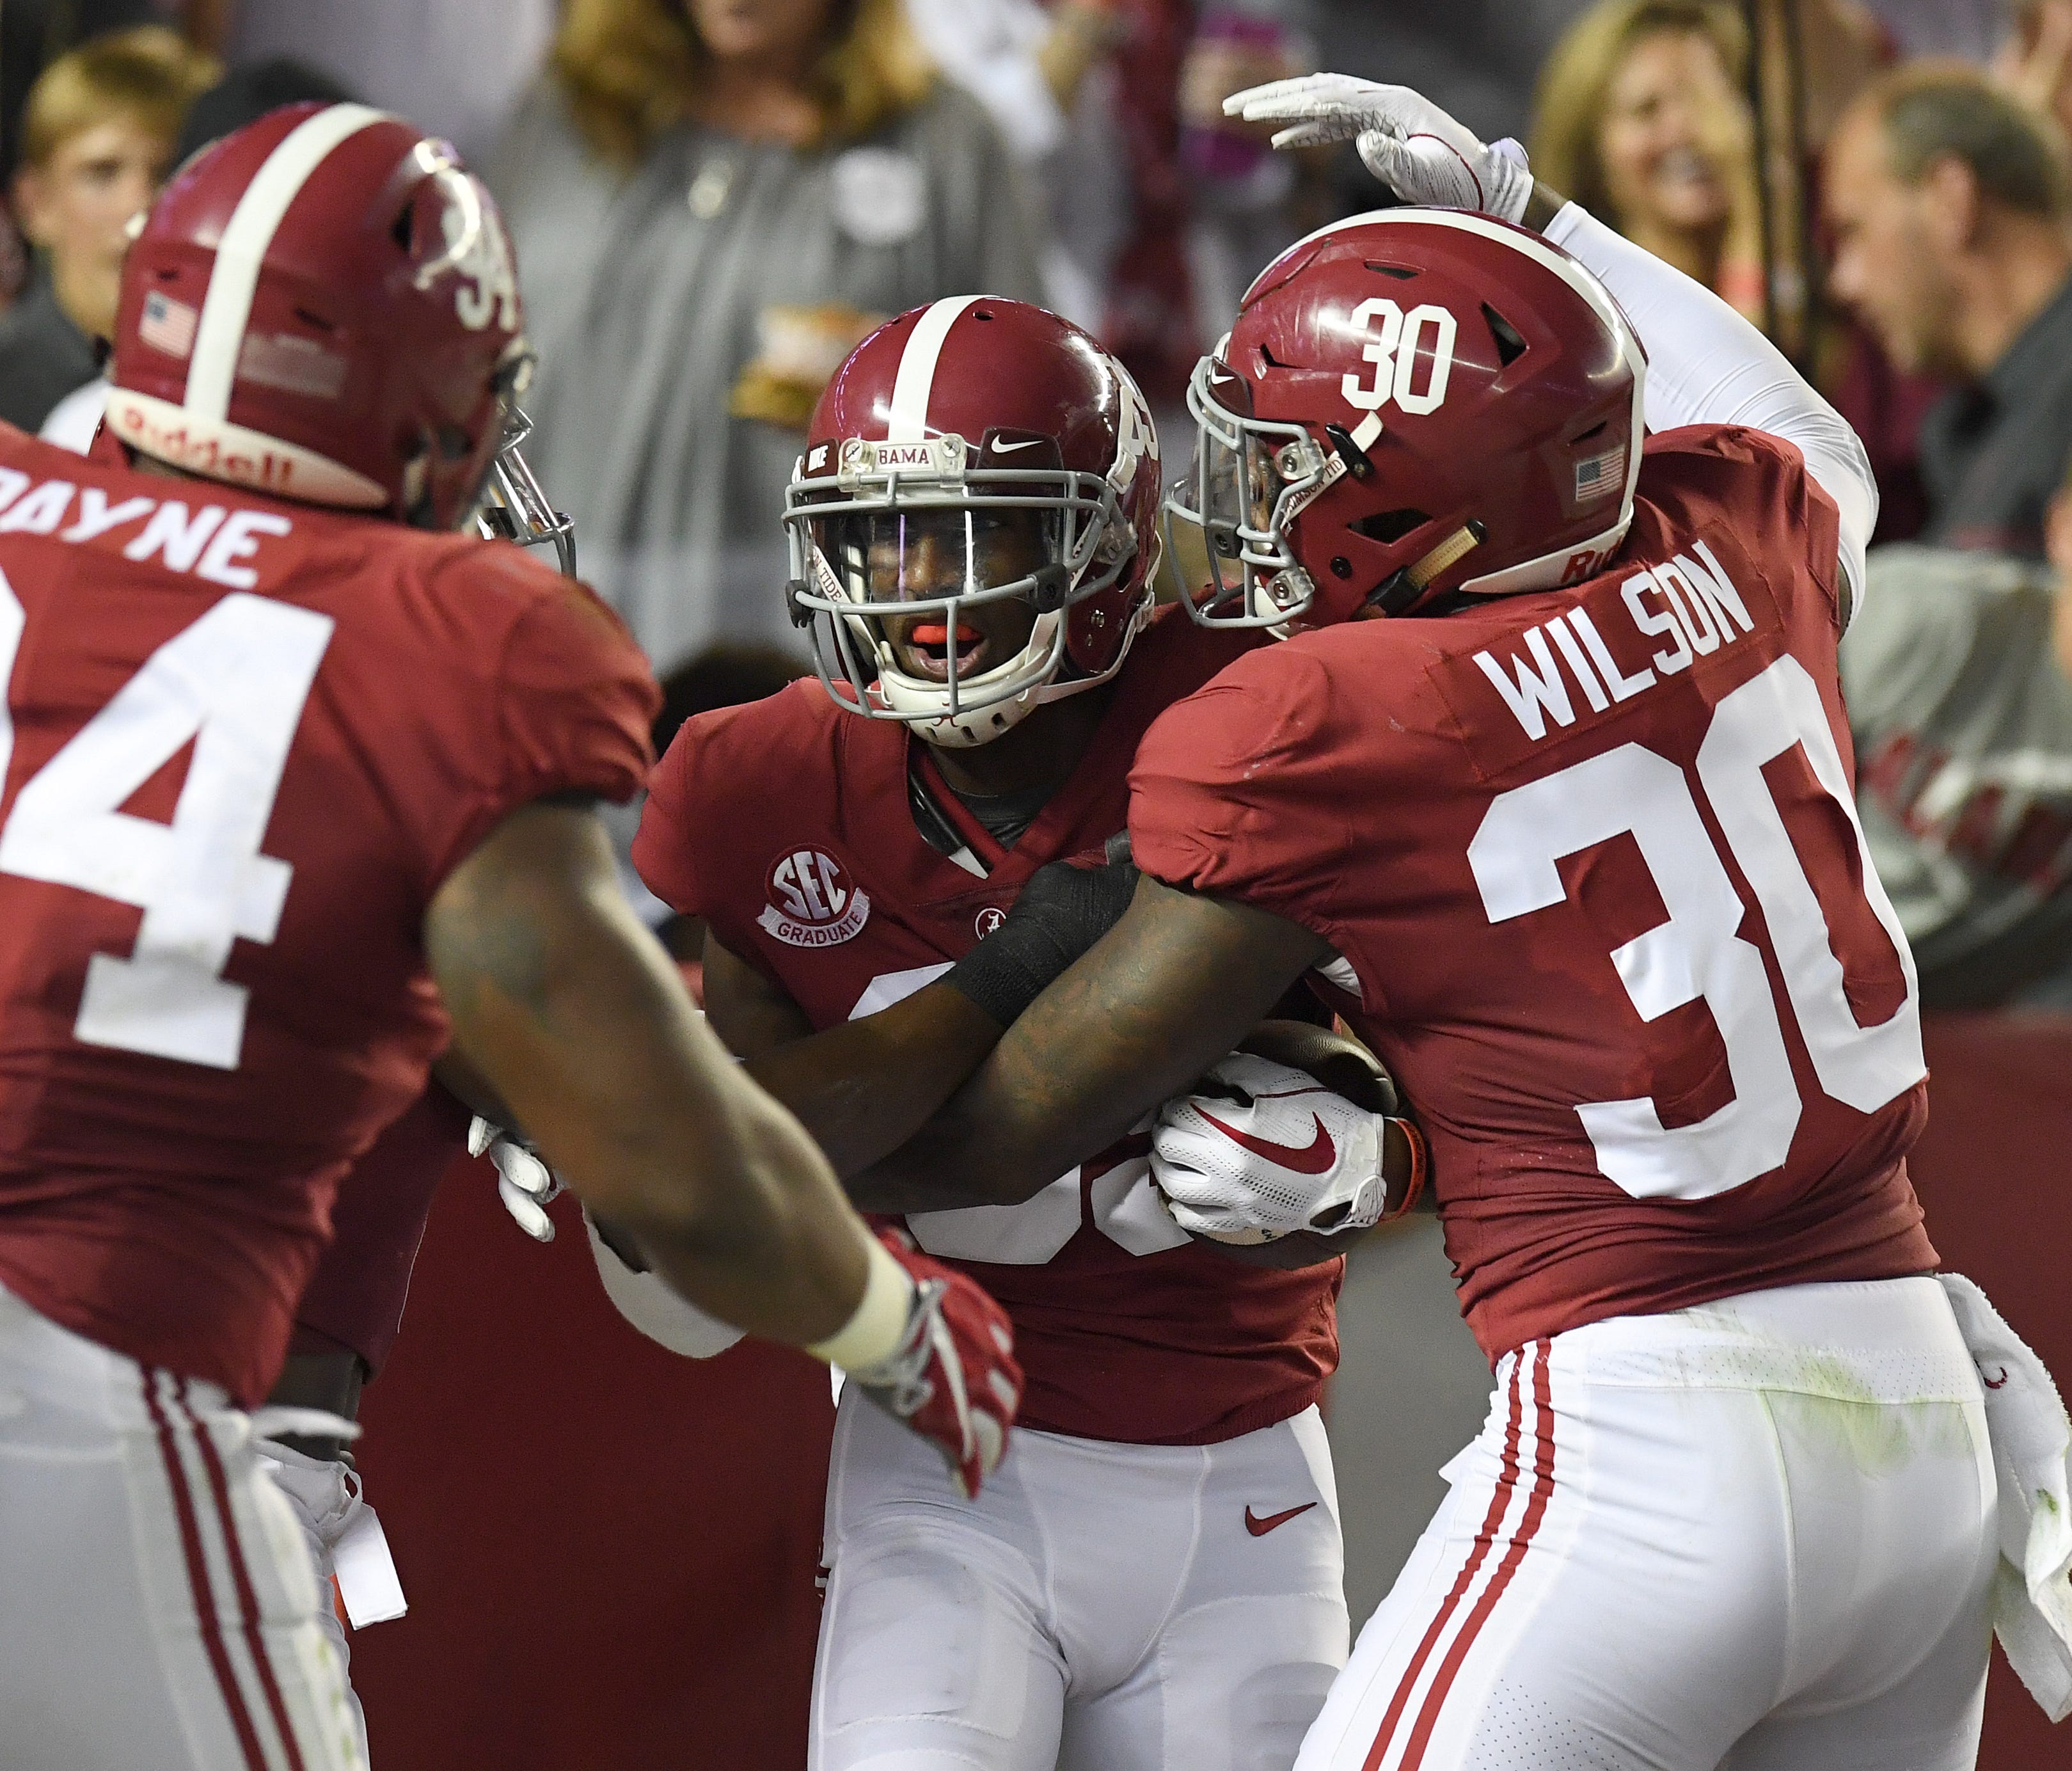 Alabama players celebrate after an interception for a touchdown against Mississippi.